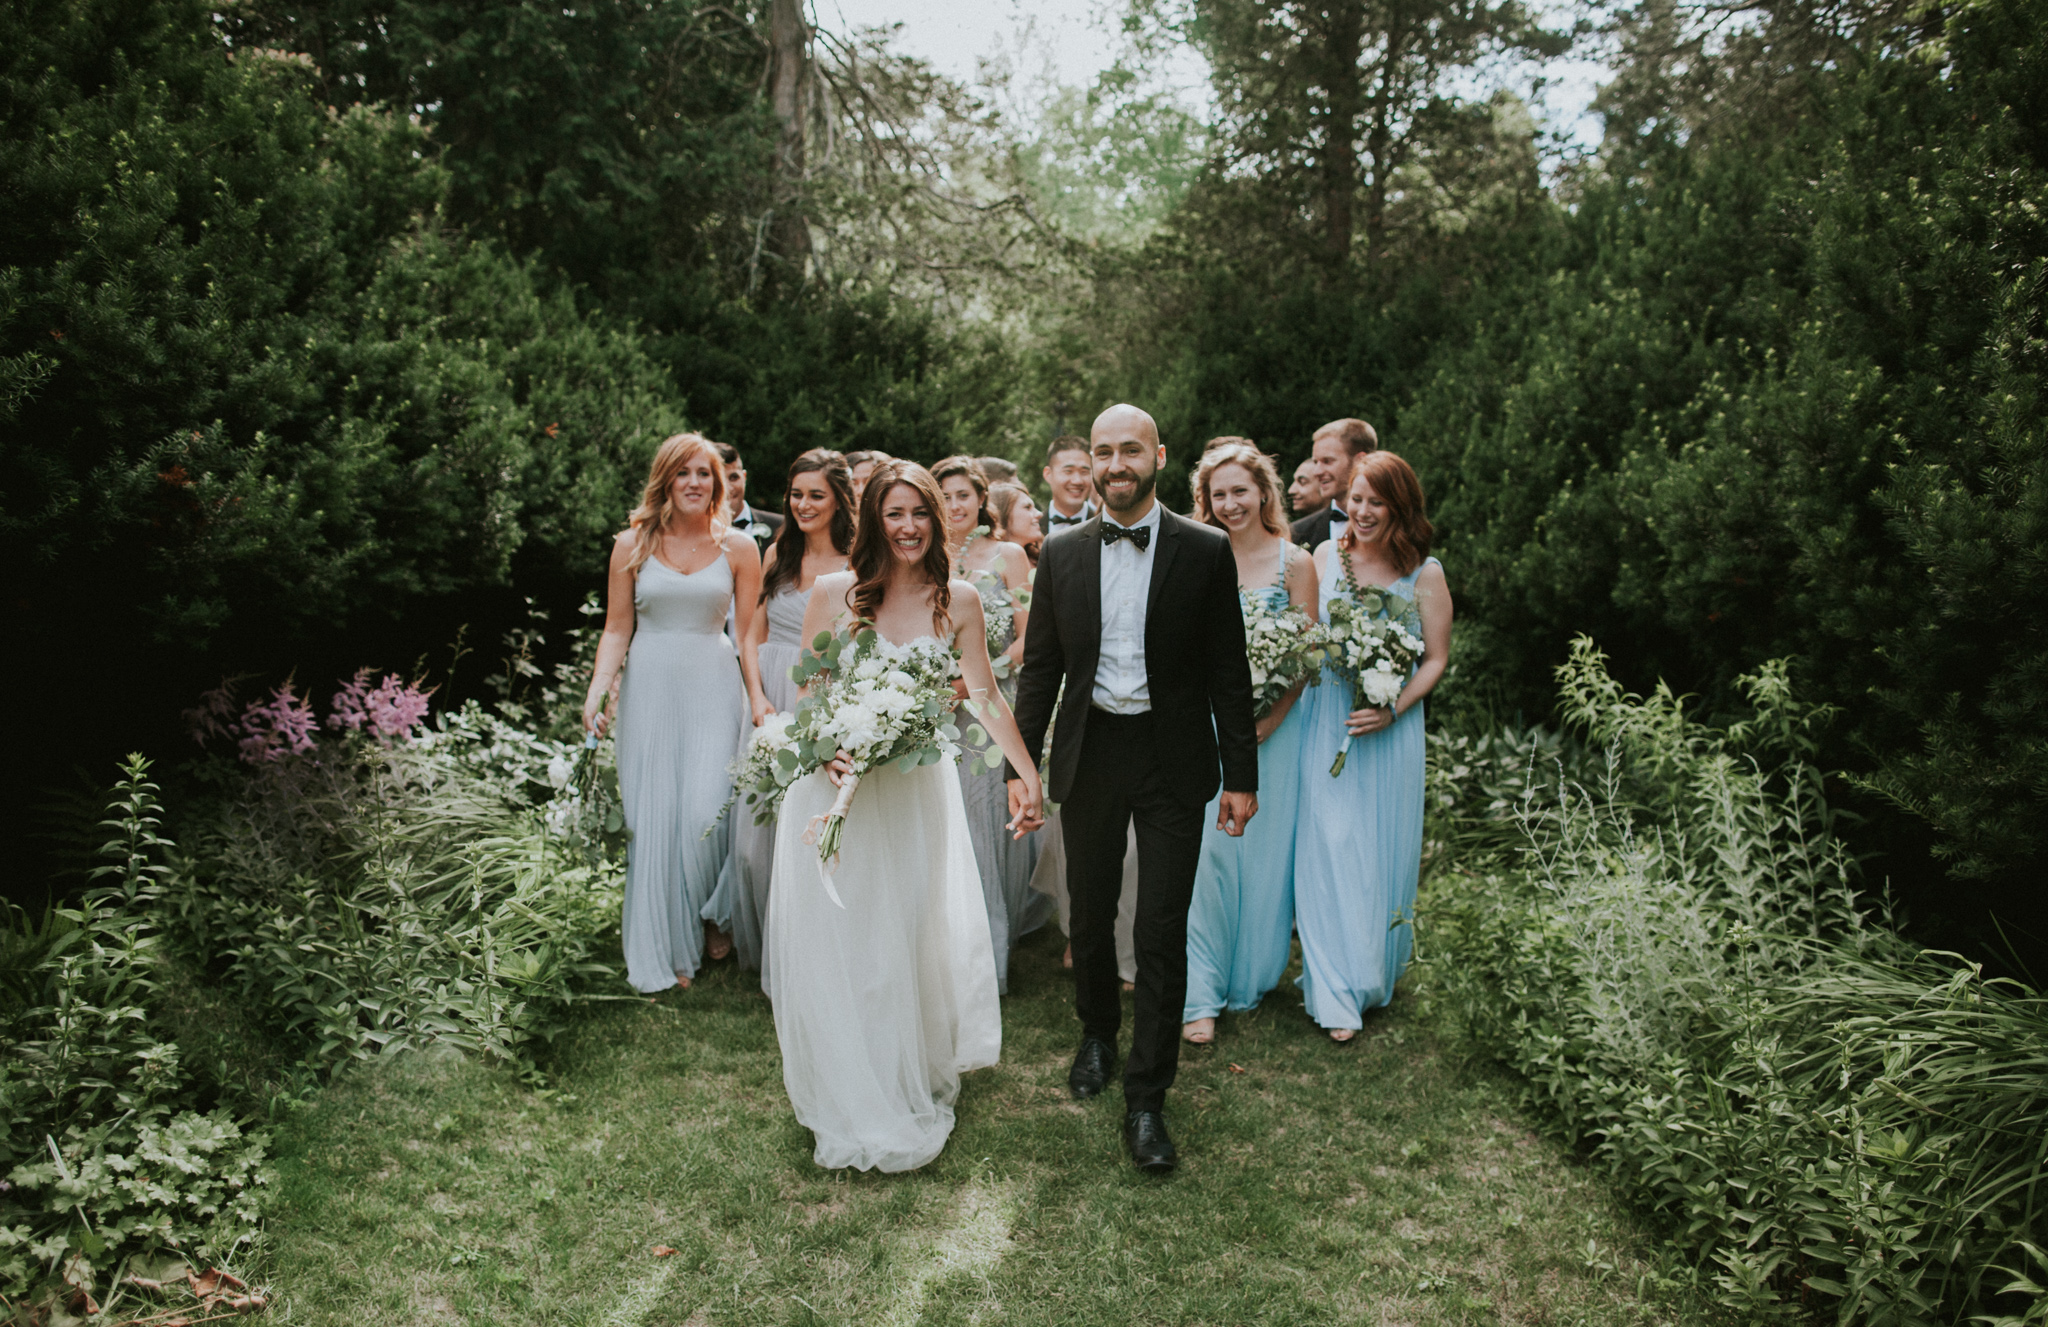 Brie + Mike garden bridal party